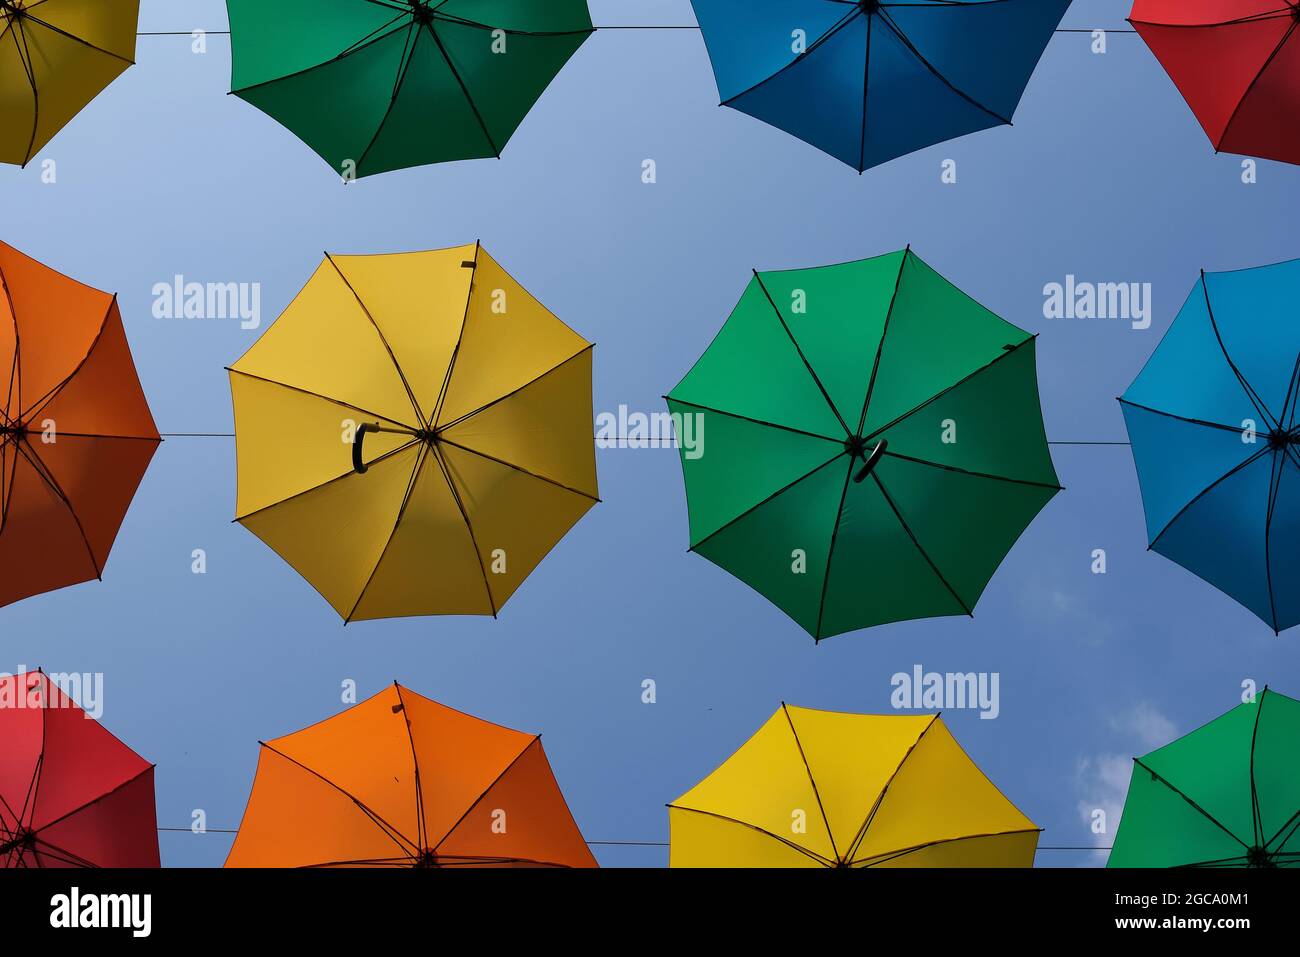 Colorful hanging umbrellas and a blue sky in the backround Stock Photo